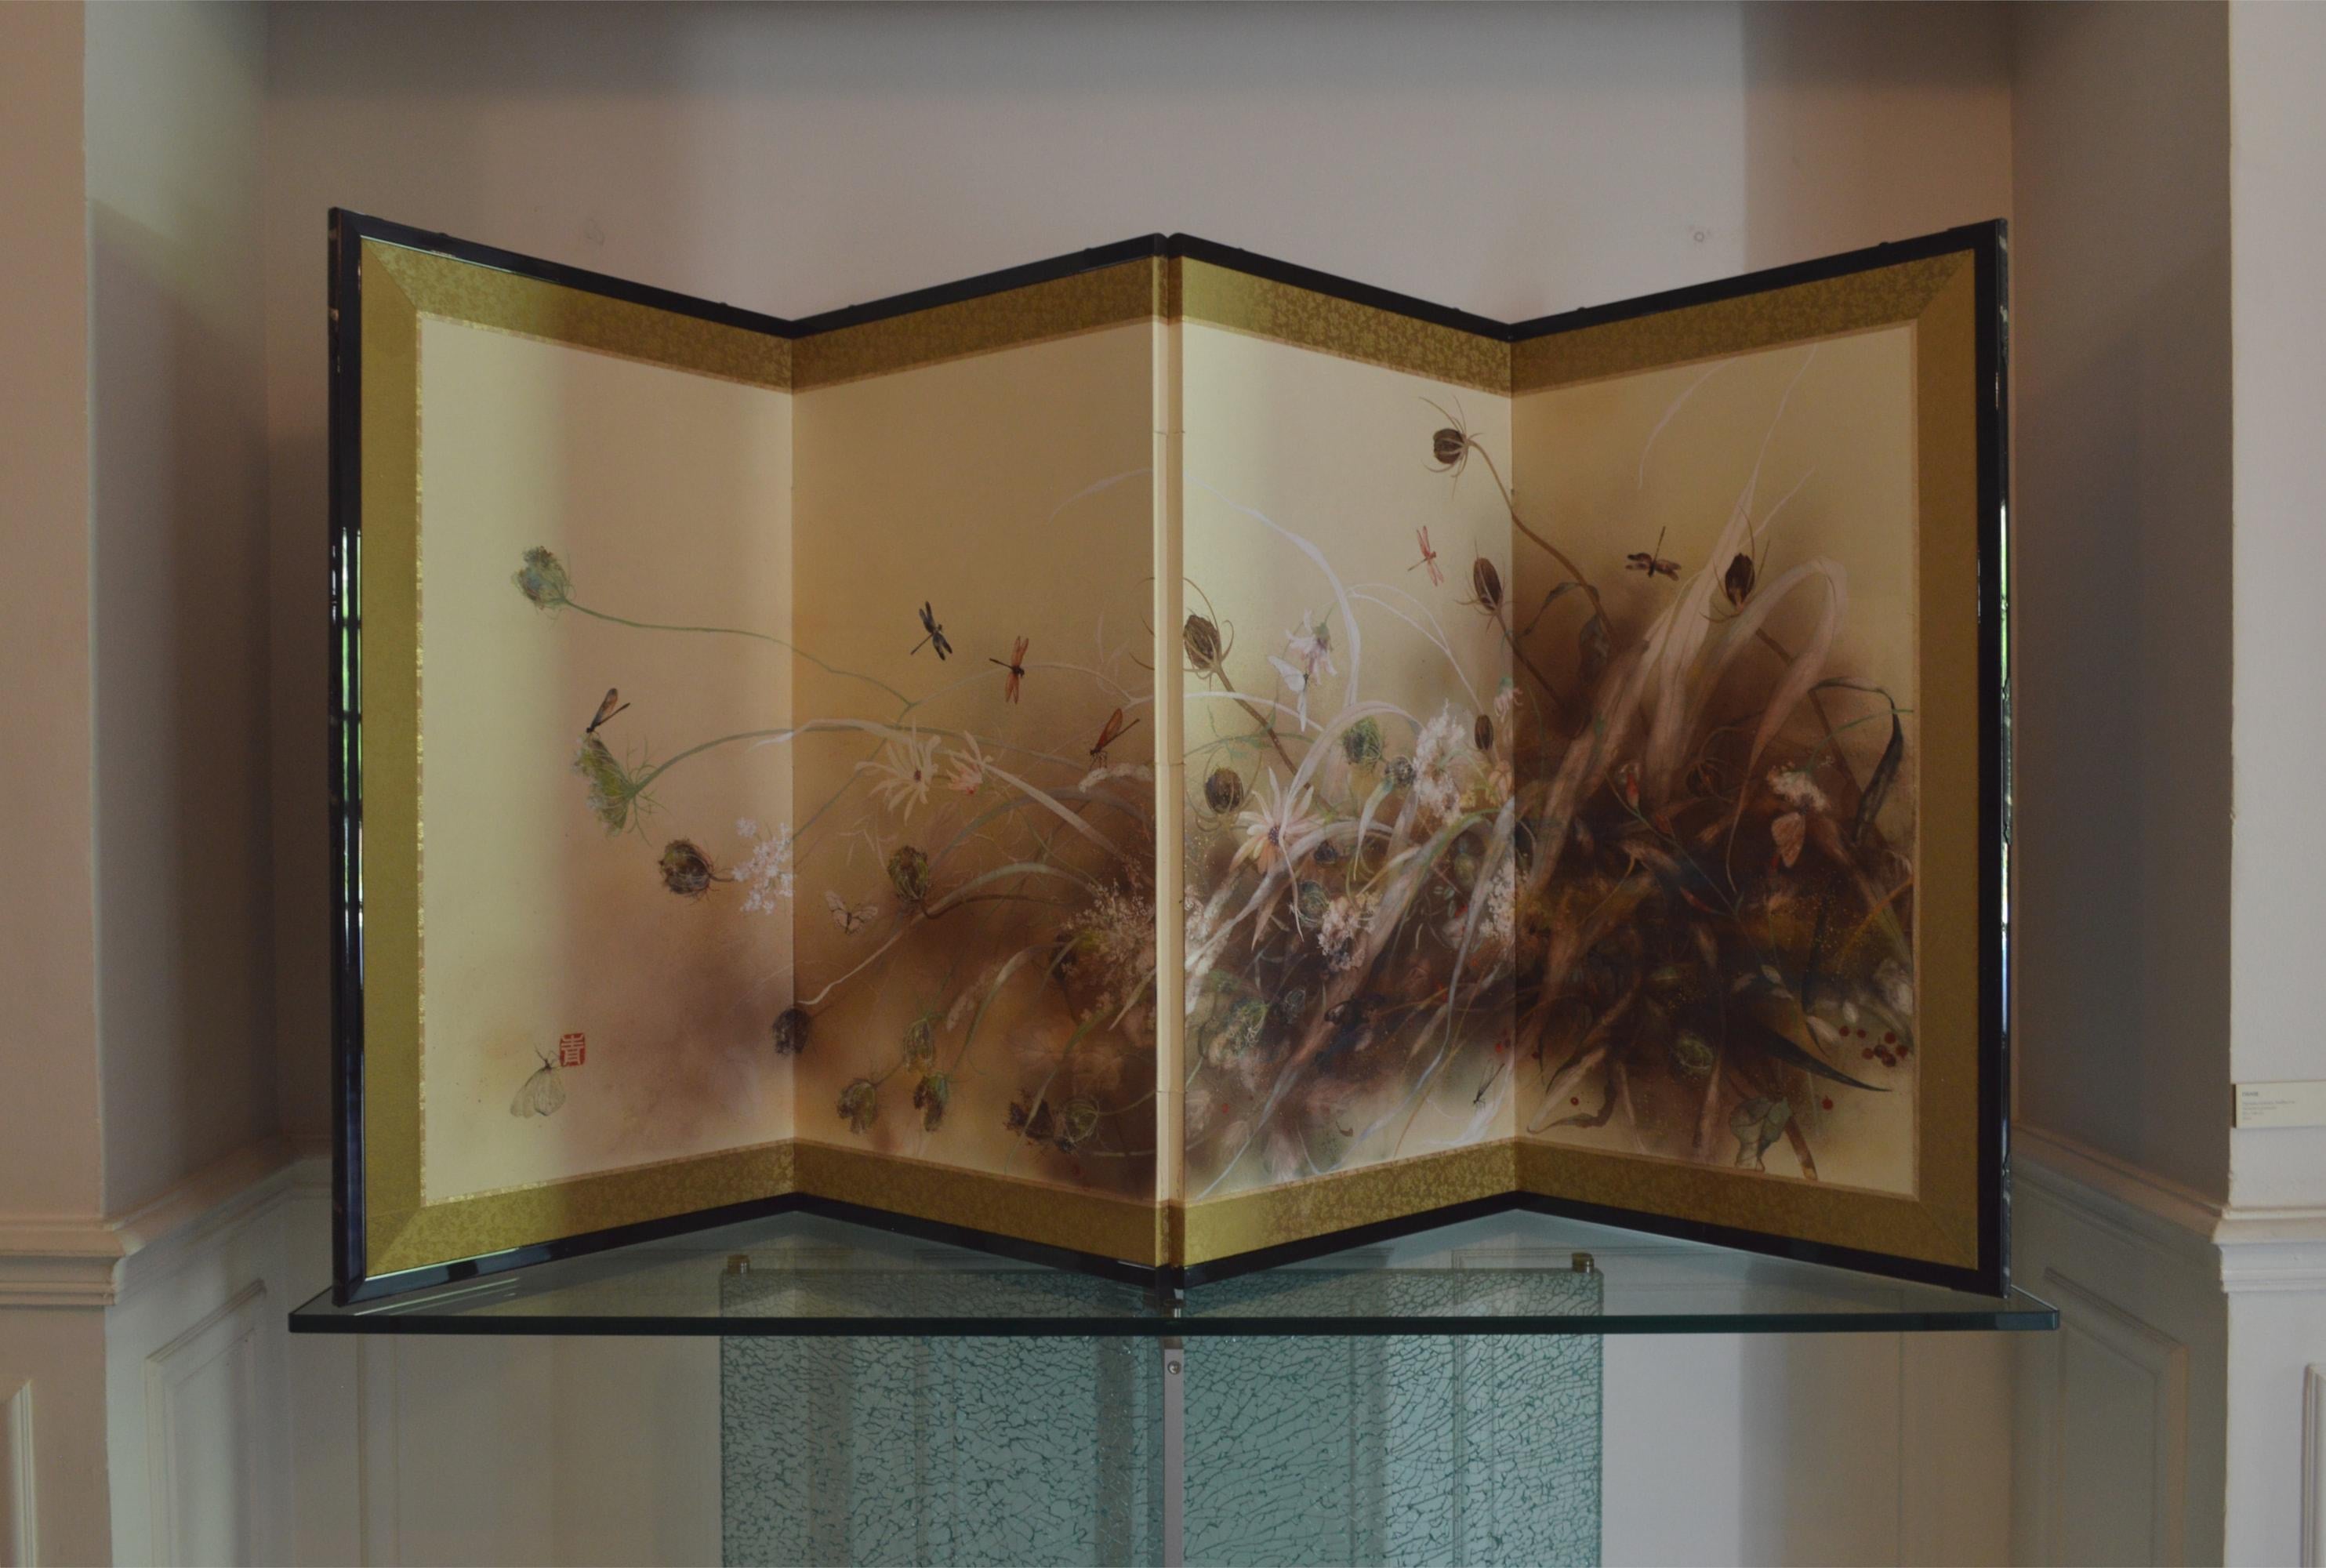 Danse (Dance) is a four-panel folding screen by contemporary Taiwanese artist Yiching Chen. As a specialist of Nihonga (traditional Japanese painting), the painter expresses all the poetry she finds in nature with delicacy and meticulousness.